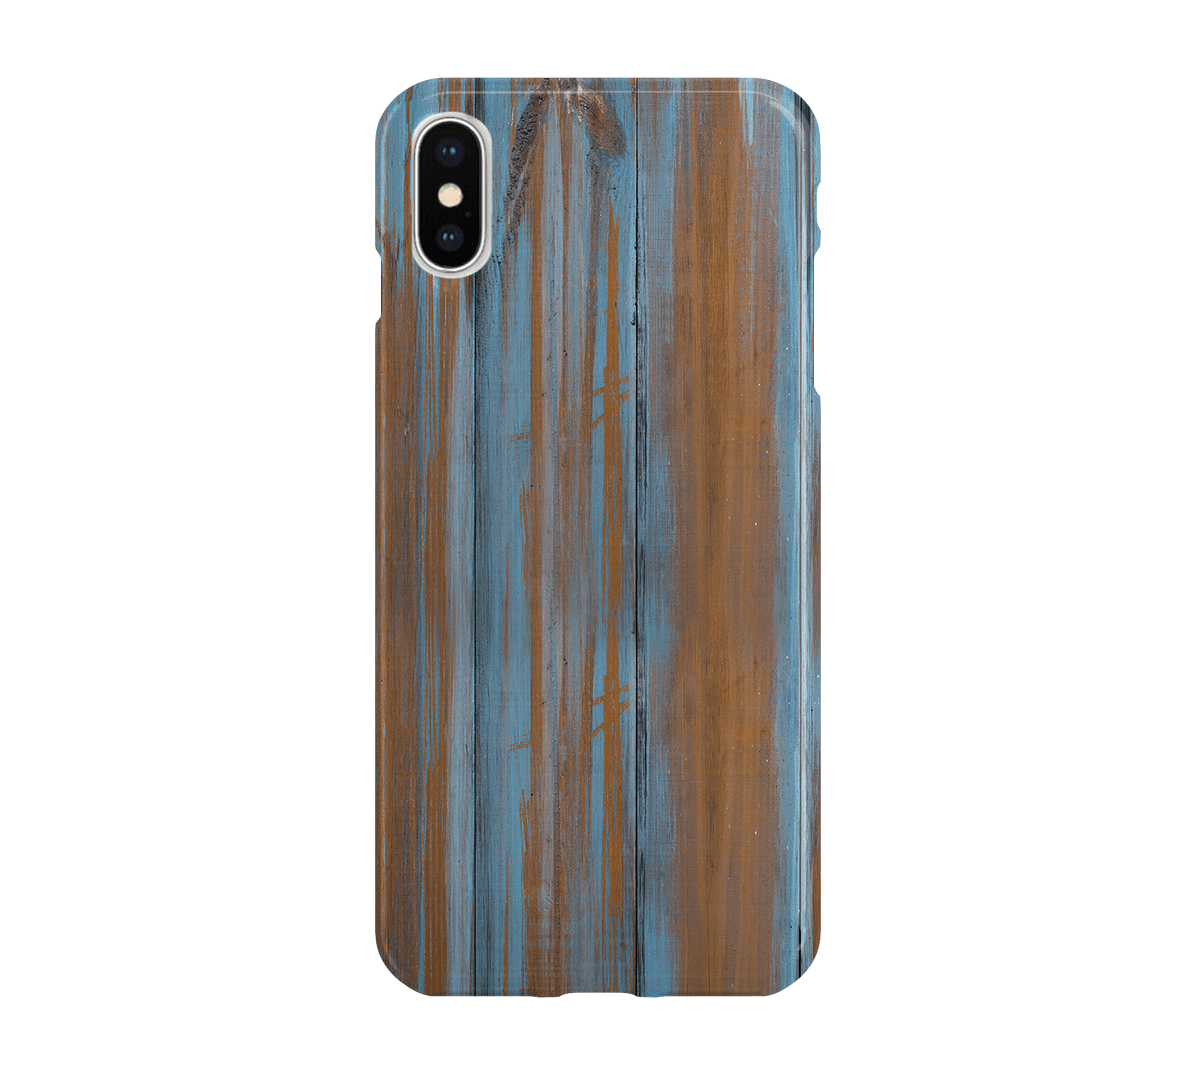 BlueSworn Wood - iPhone phone case designs by CaseSwagger